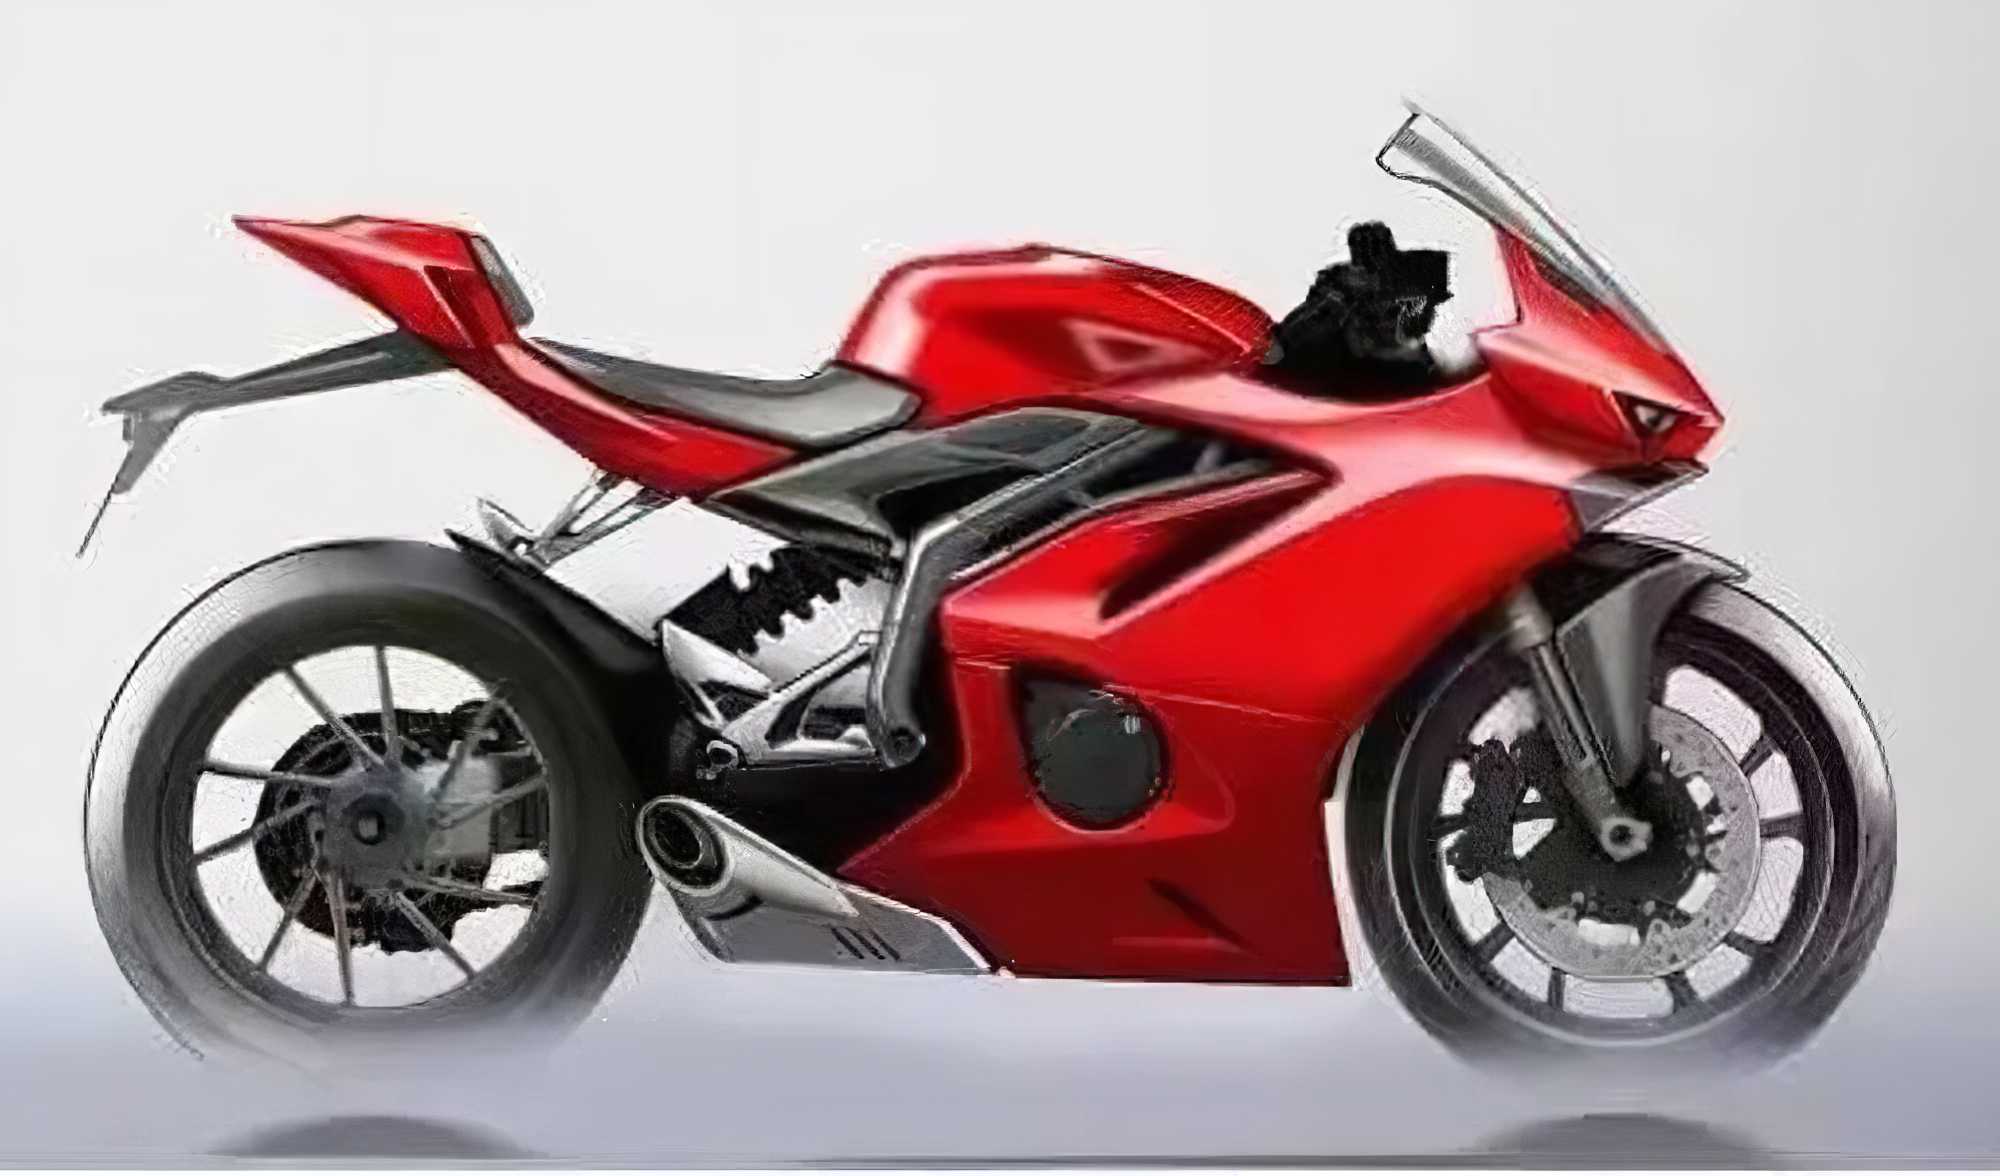 Sports bikes from Colove announced
- also in the MOTORCYCLES.NEWS APP